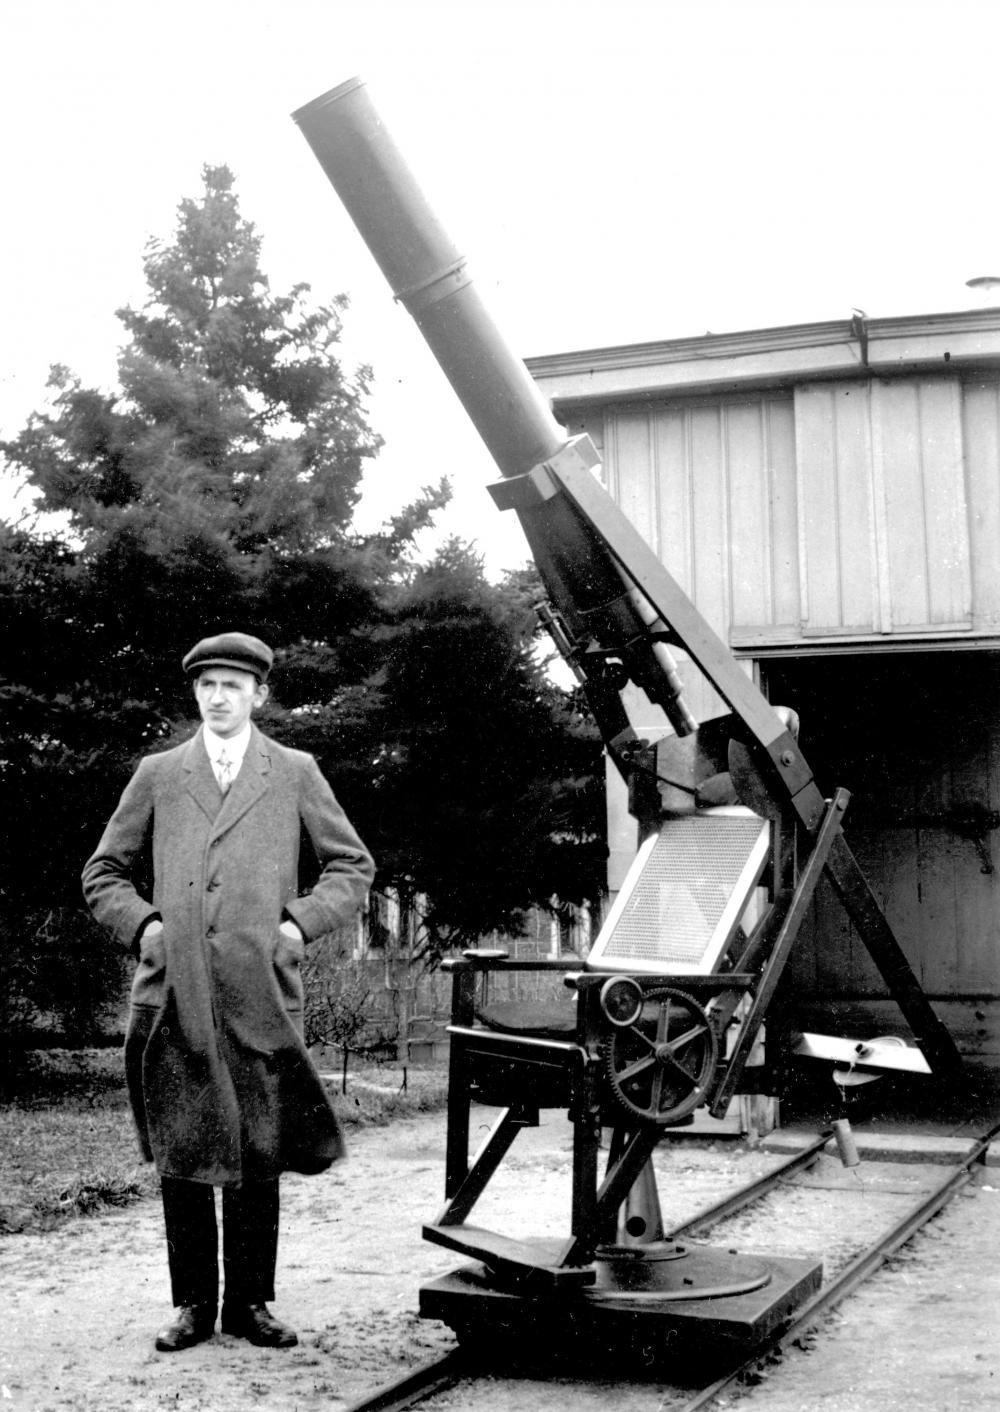 Cuno Hoffmeister with the Comet seeker (Image cour